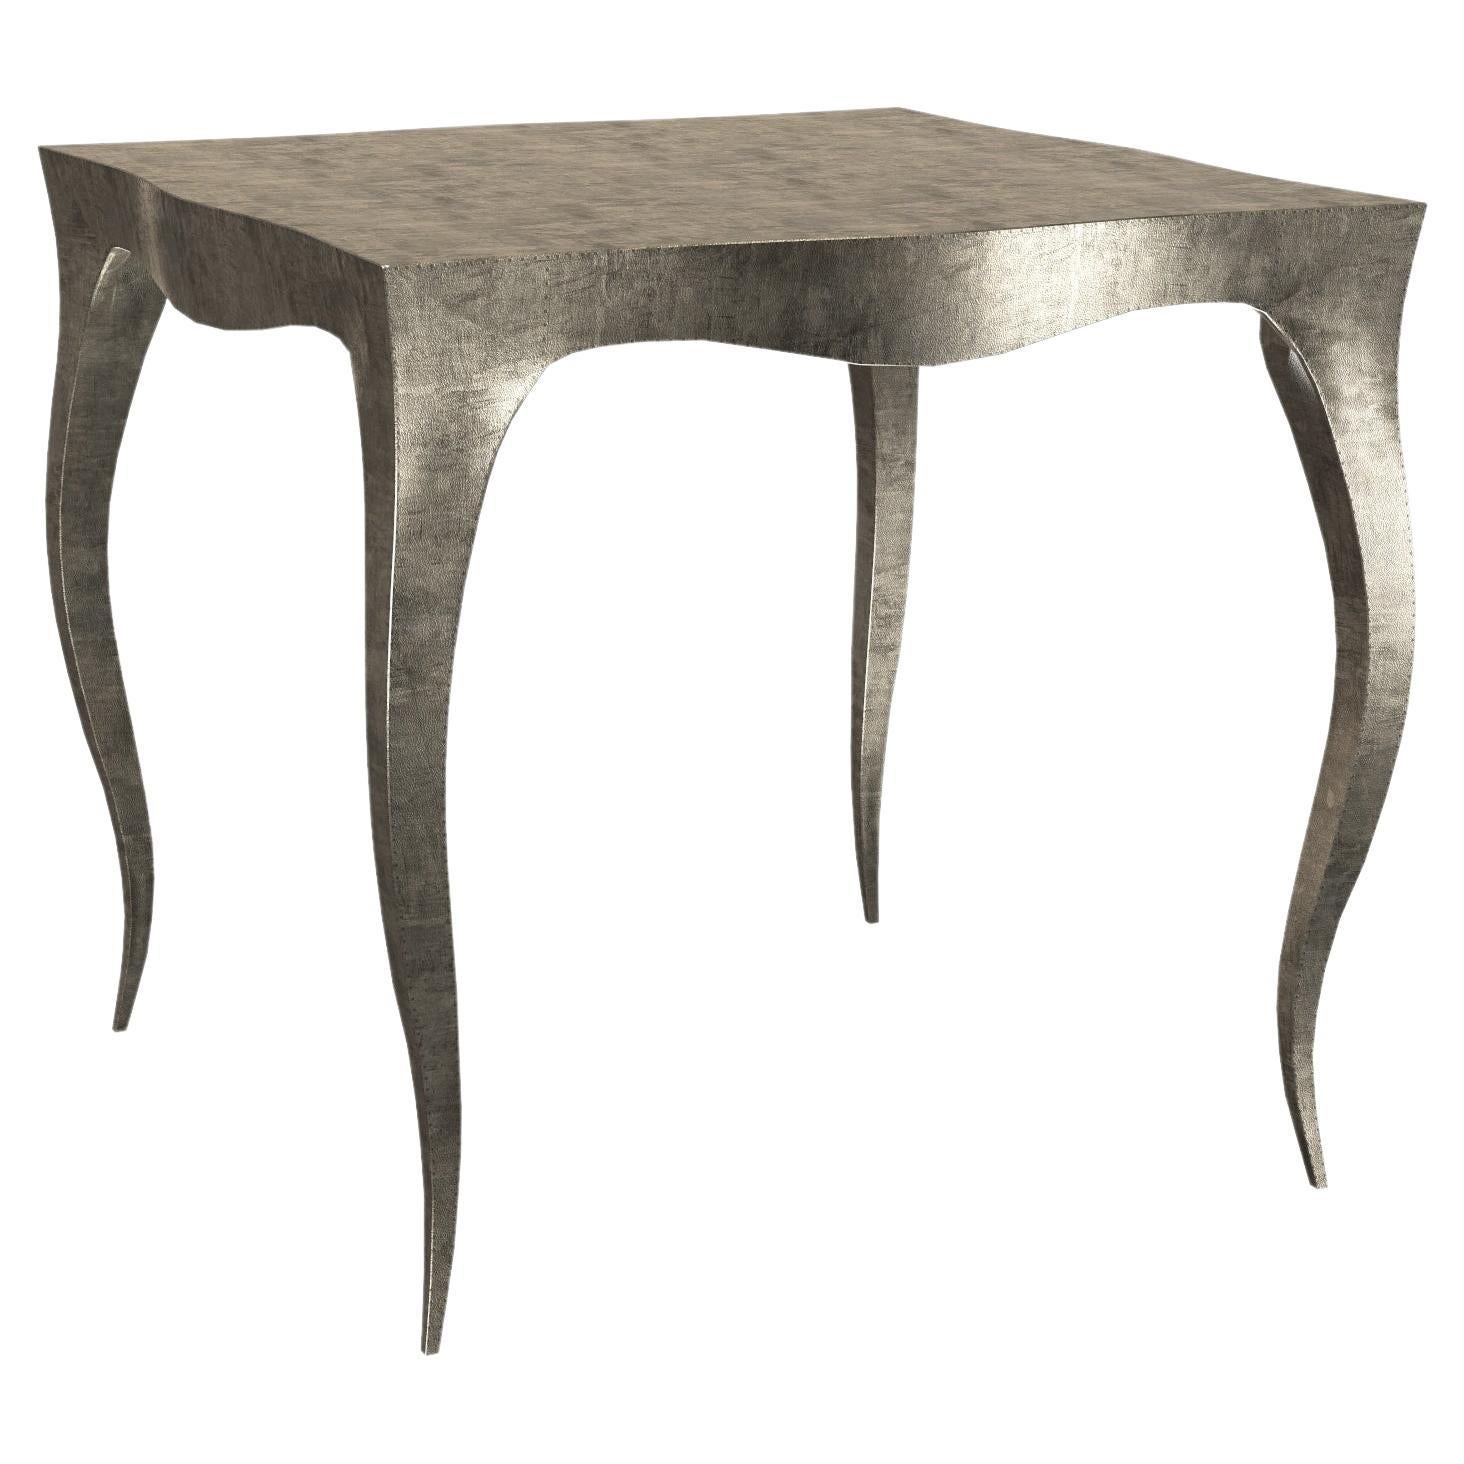 Other Louise Art Deco Conference Tables Mid. Hammered Antique Bronze by Paul Mathieu For Sale